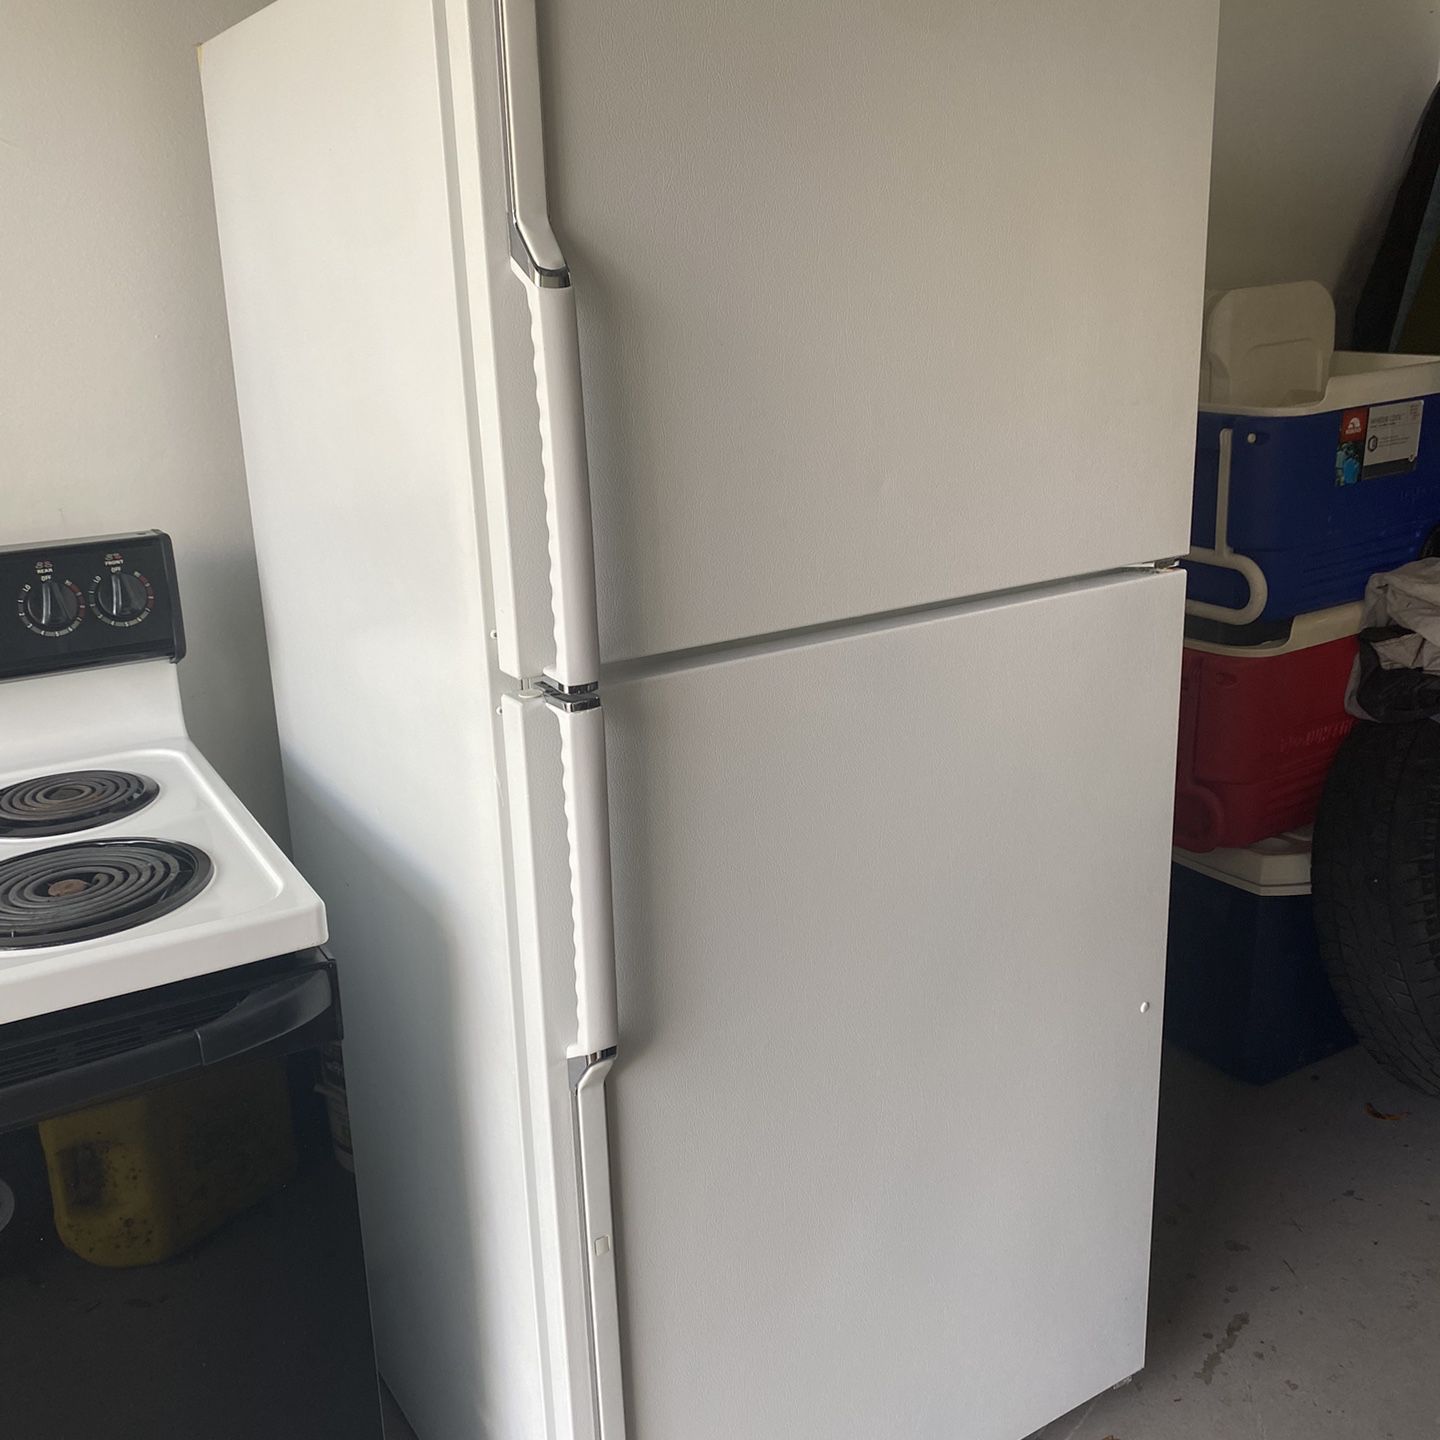 GE Refrigerator With Ice maker 